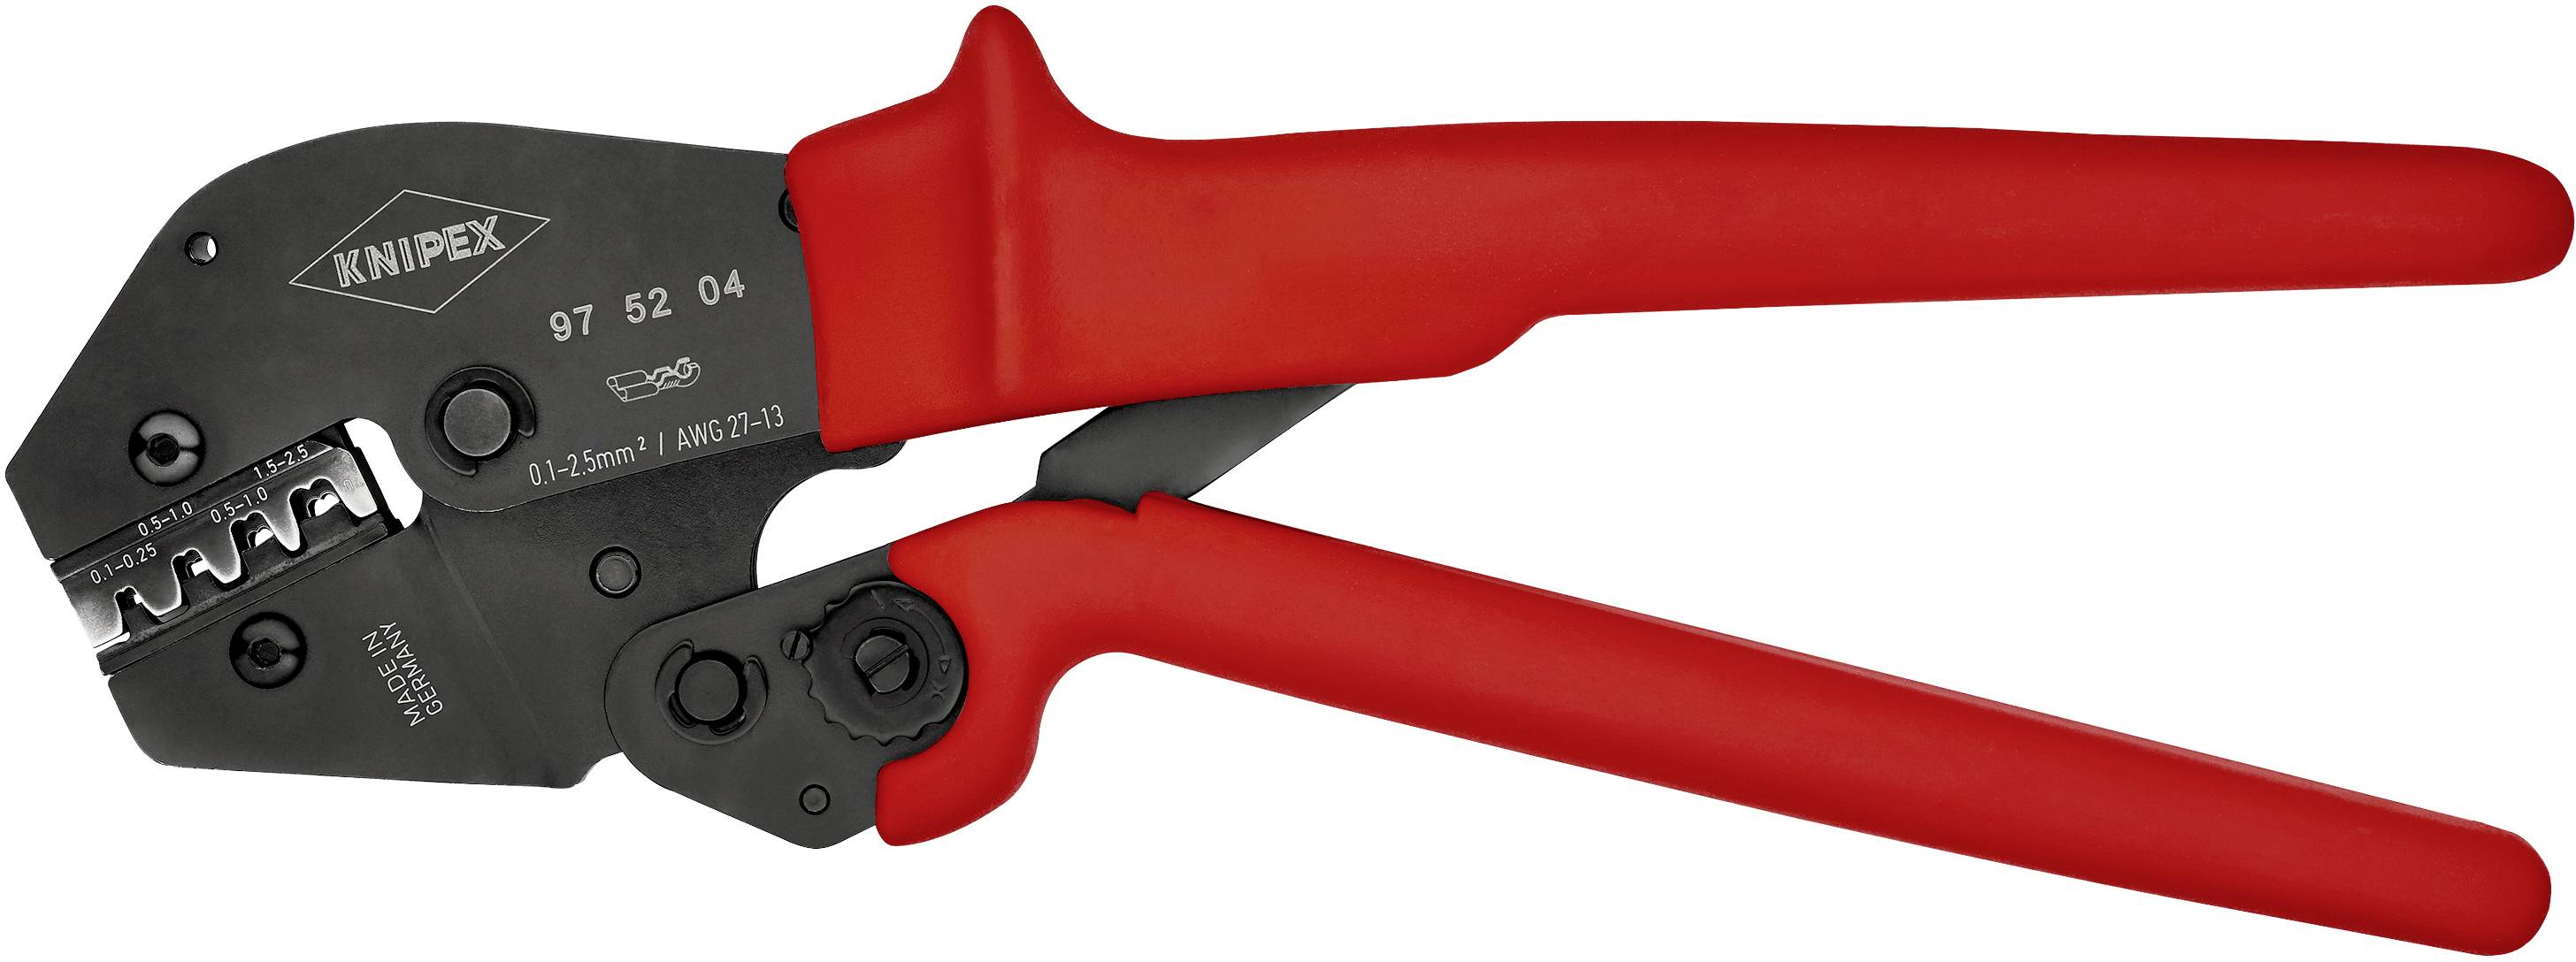 Knipex Knipex-Werk 97 52 Crimper Non-insulated open end connectors up to mm² | Conrad.com